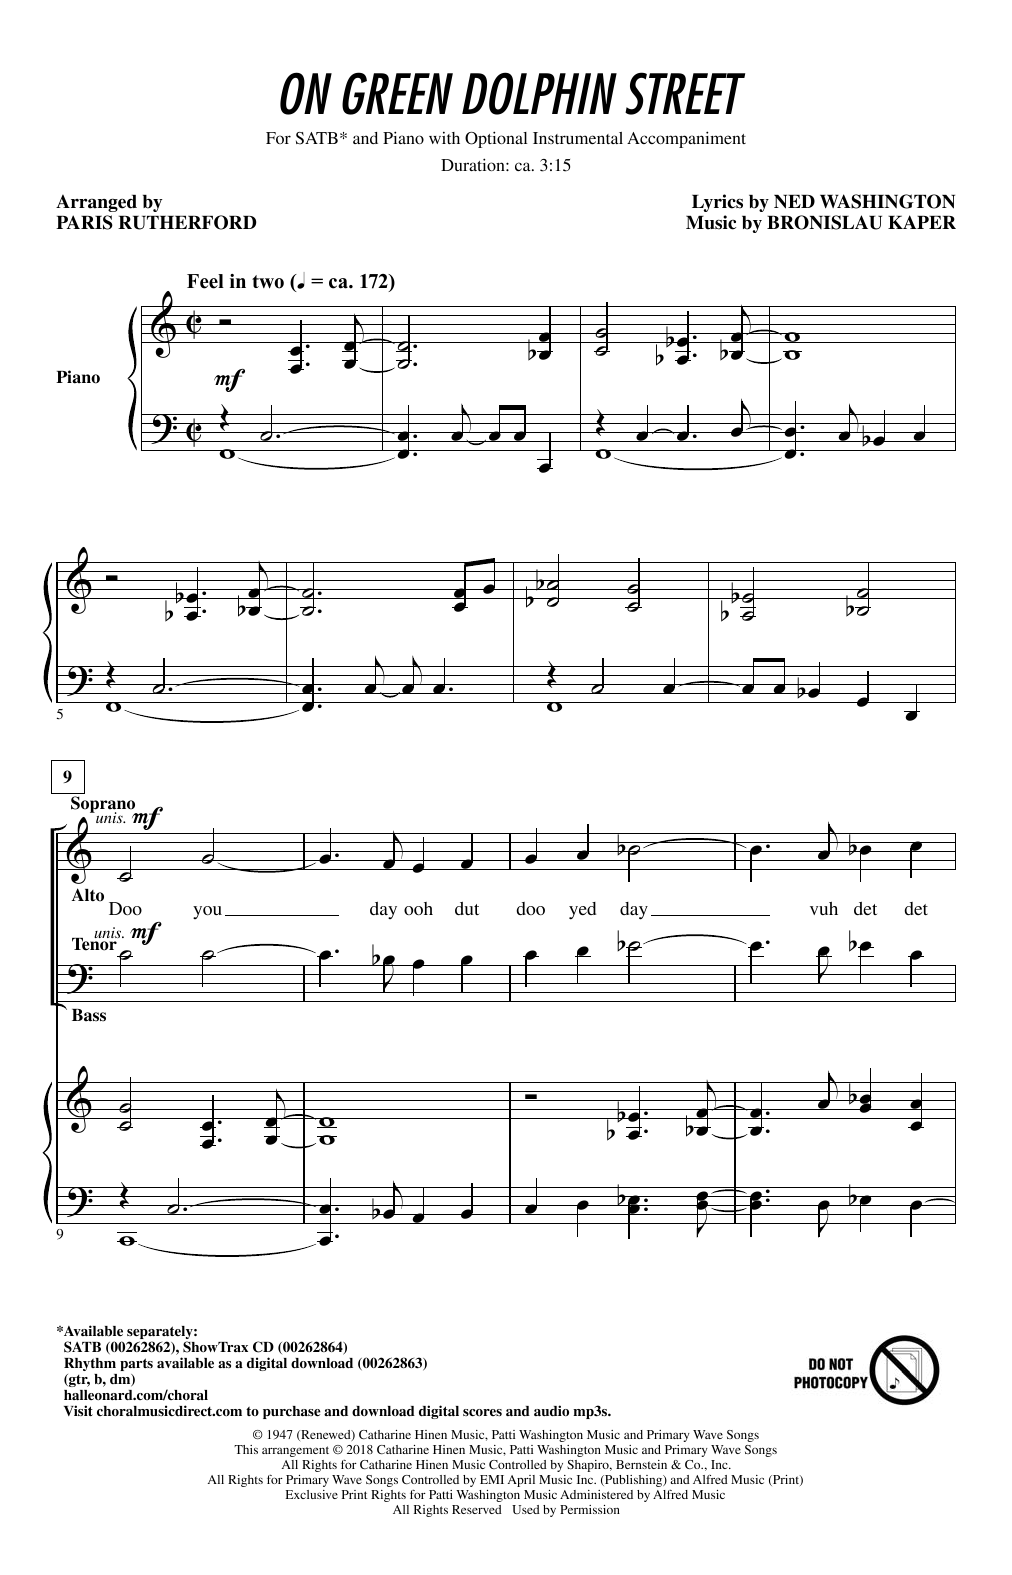 Download Paris Rutherford On Green Dolphin Street Sheet Music